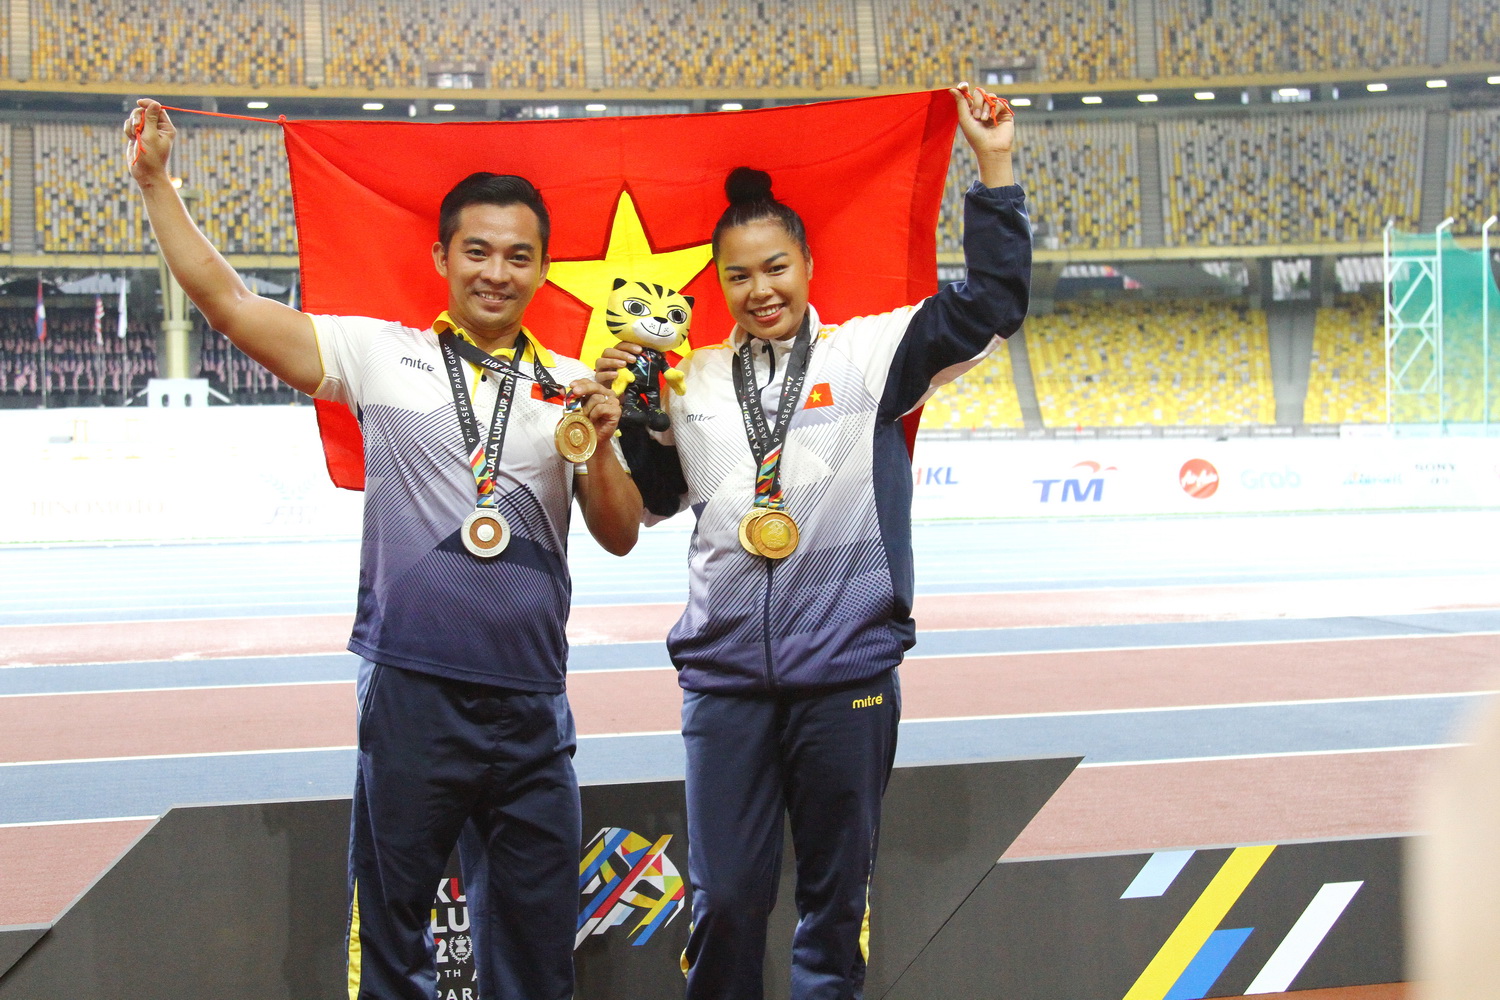 Cao Ngoc Hung and his wife, Nguyen Ngoc Hai, celebrate their achievements at the 2017 ASEAN Para Games in Malaysia. Photo: Tuoi Tre